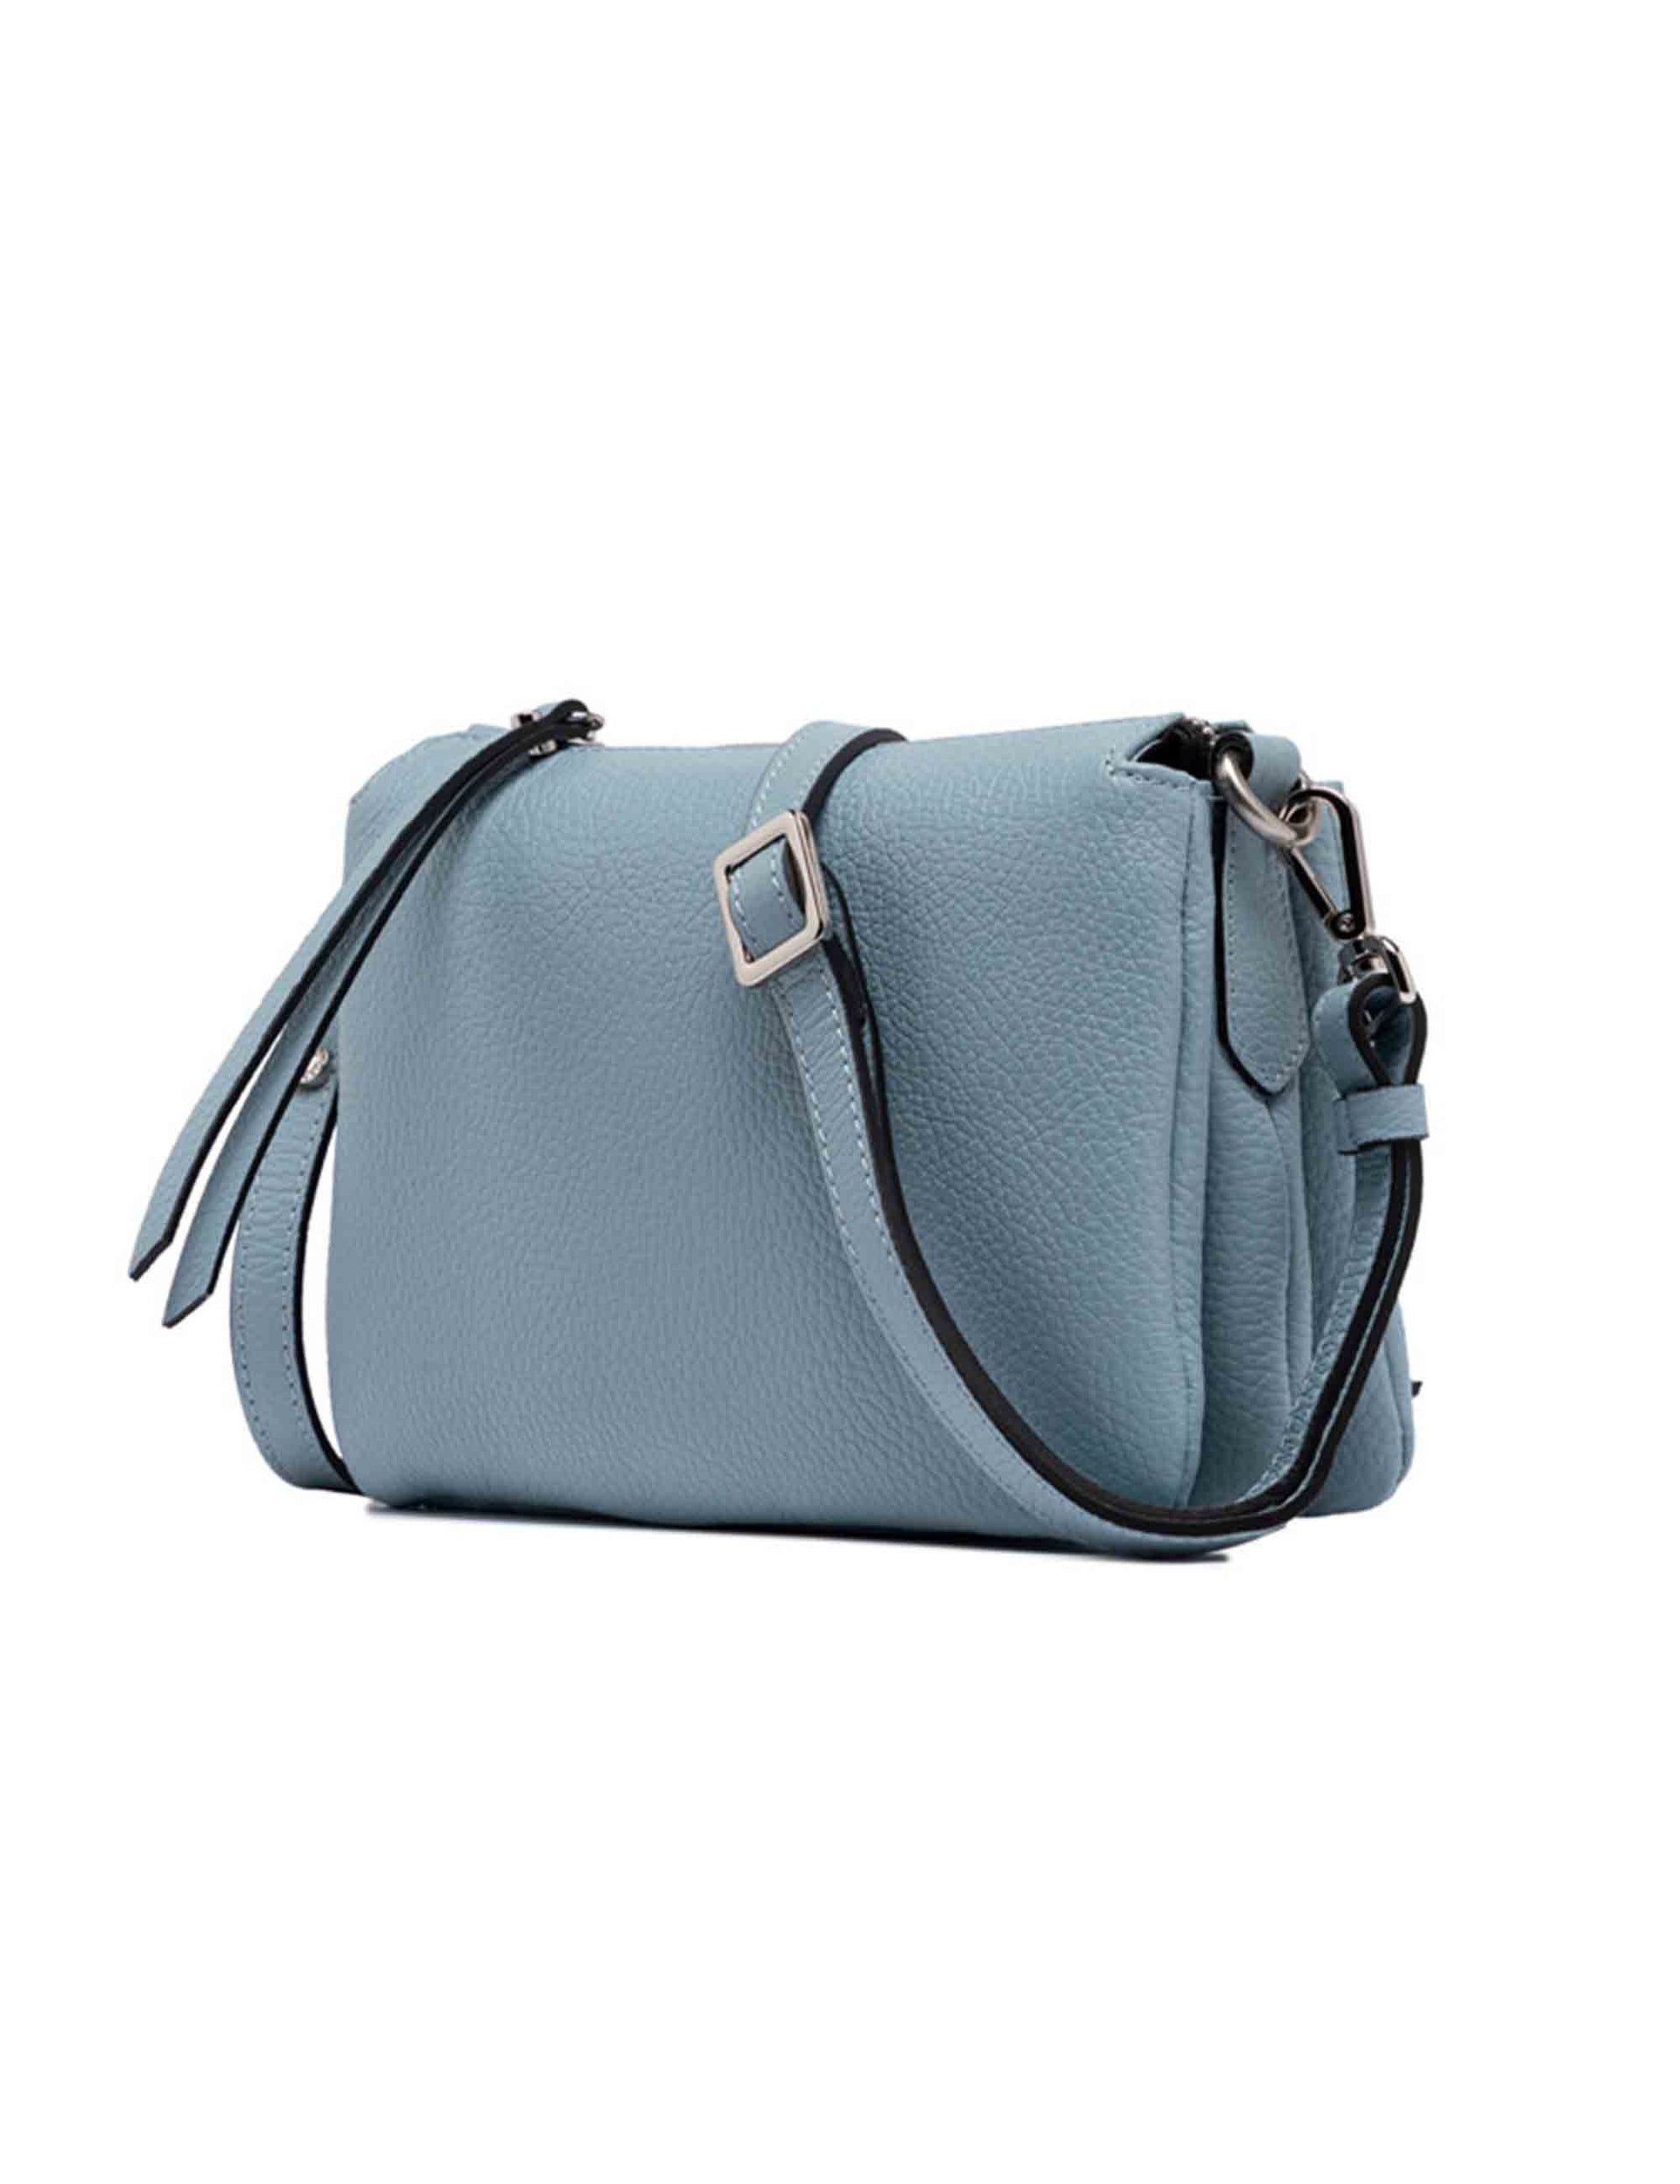 Three women's clutch bags in light blue leather with matching removable shoulder strap